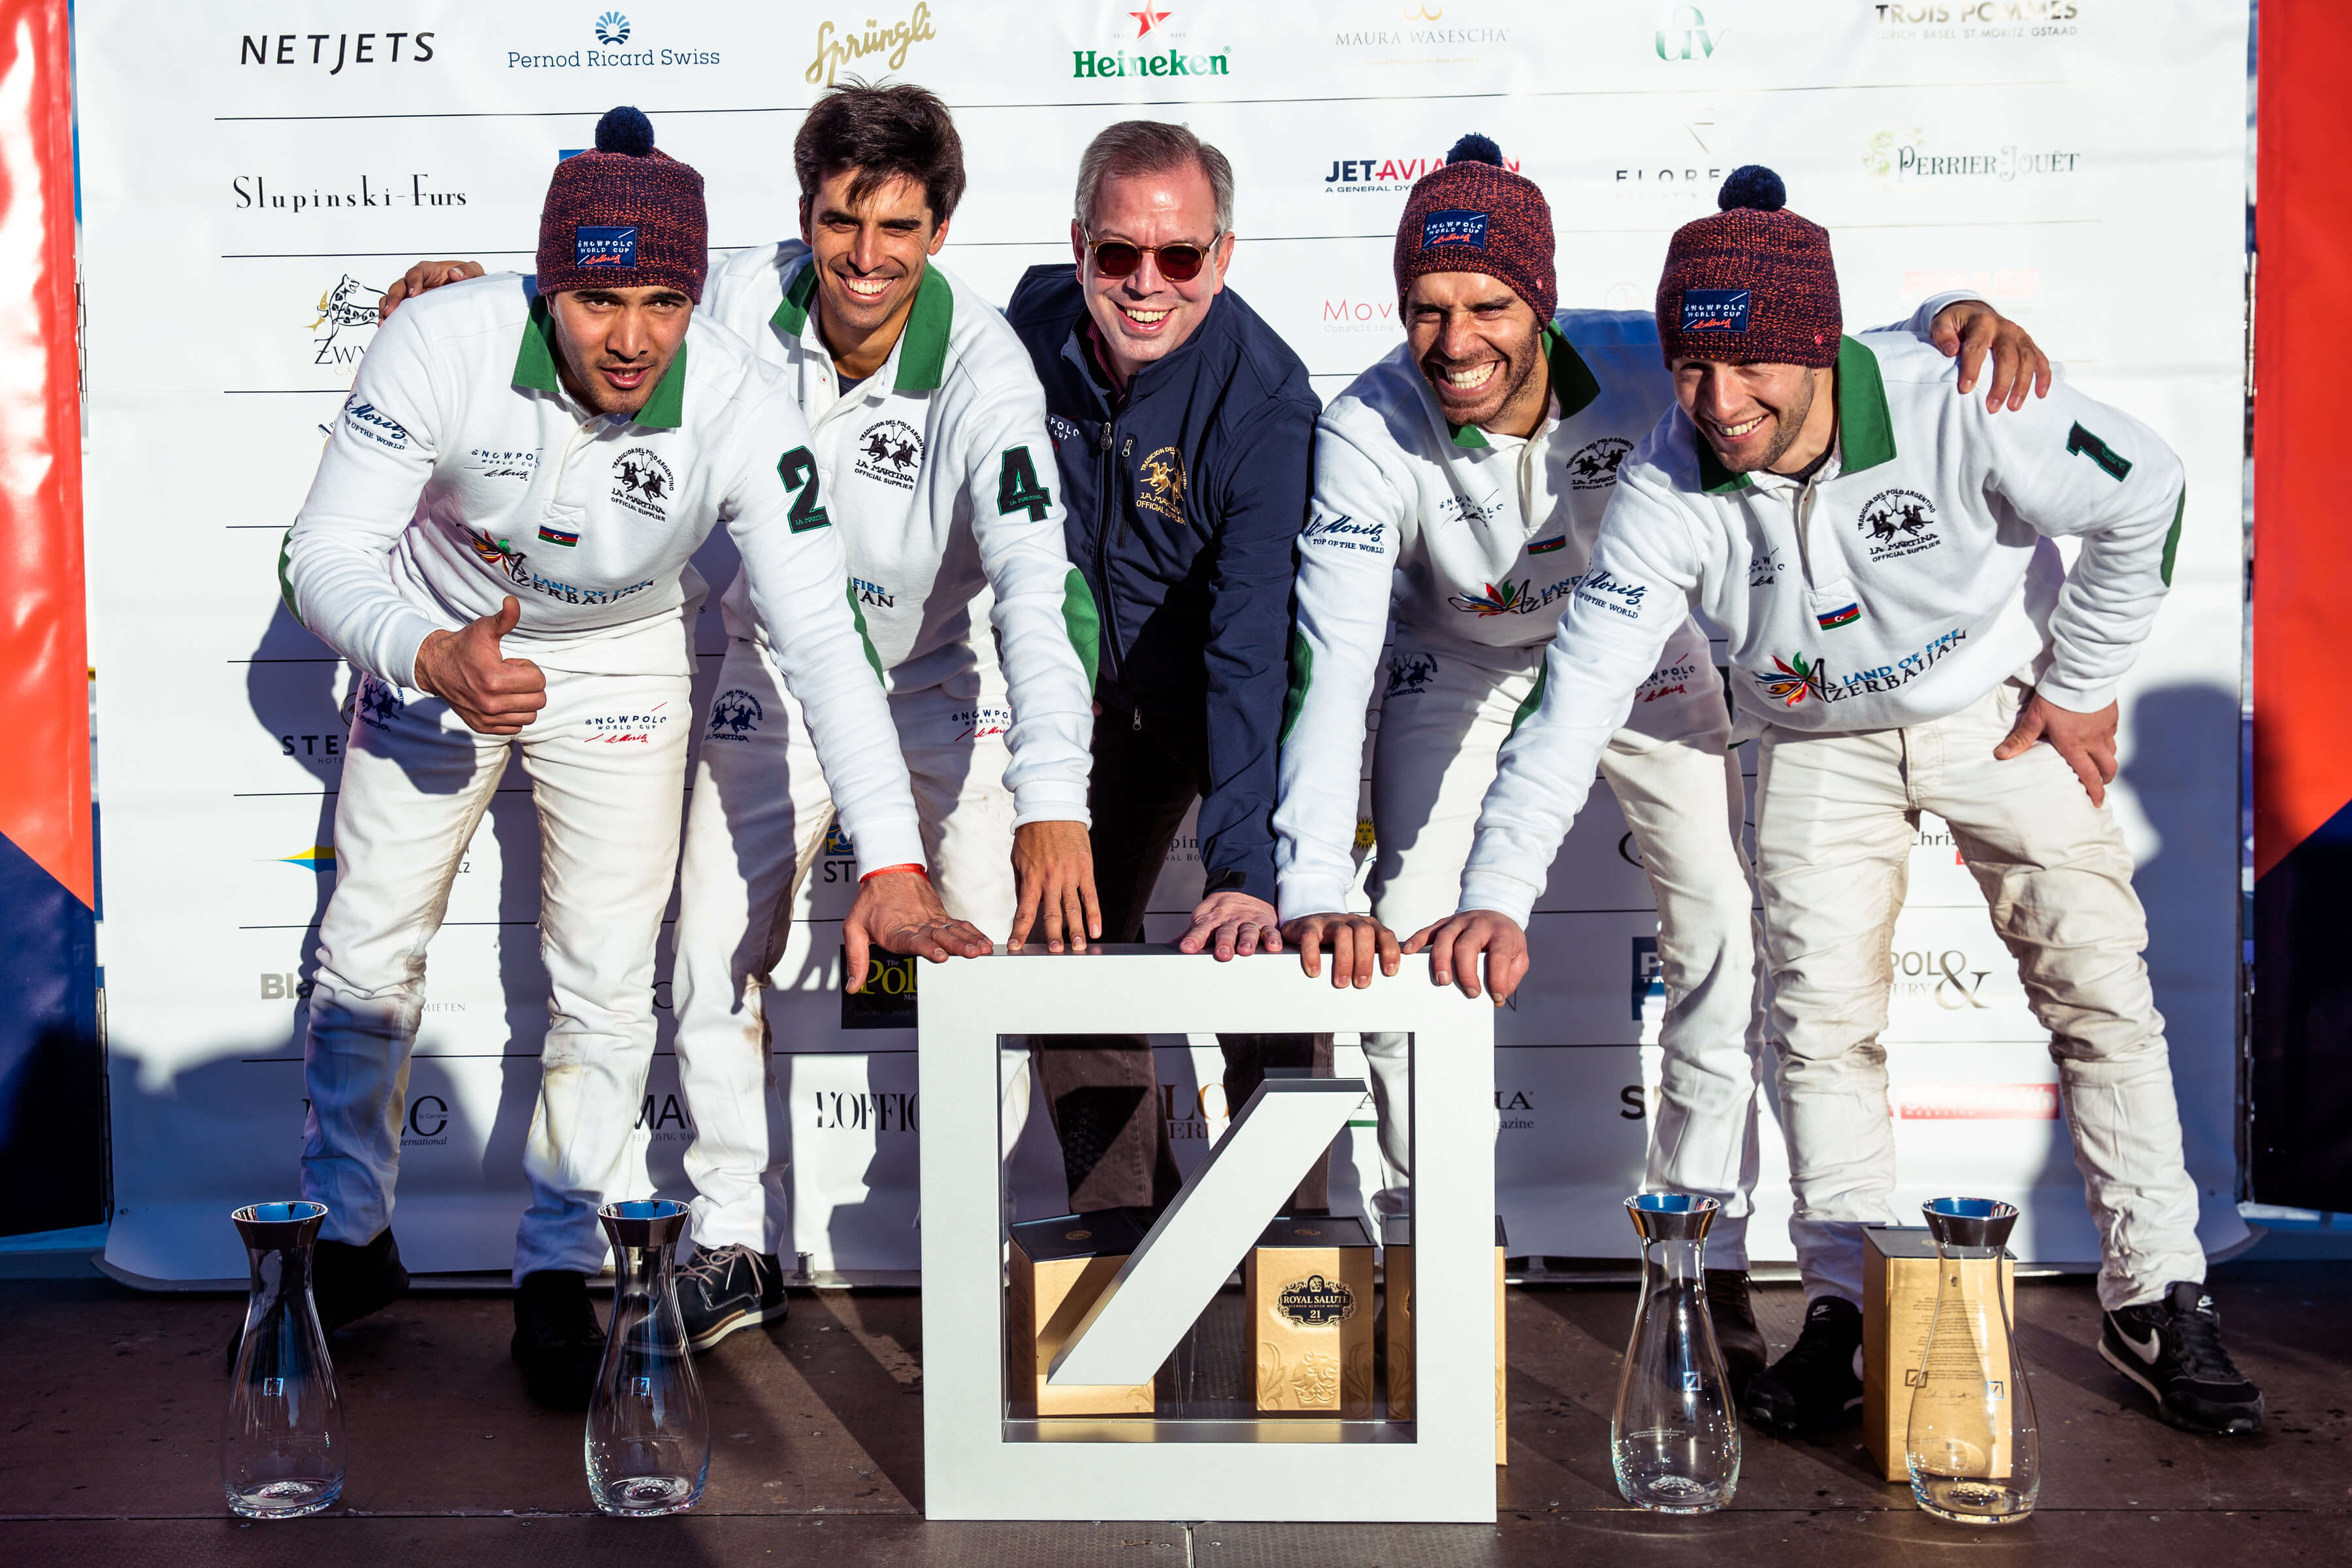 The Azerbaijan Land of Fire Snow Polo team receives the Deutsche Bank Wealth Management Challenge Cup